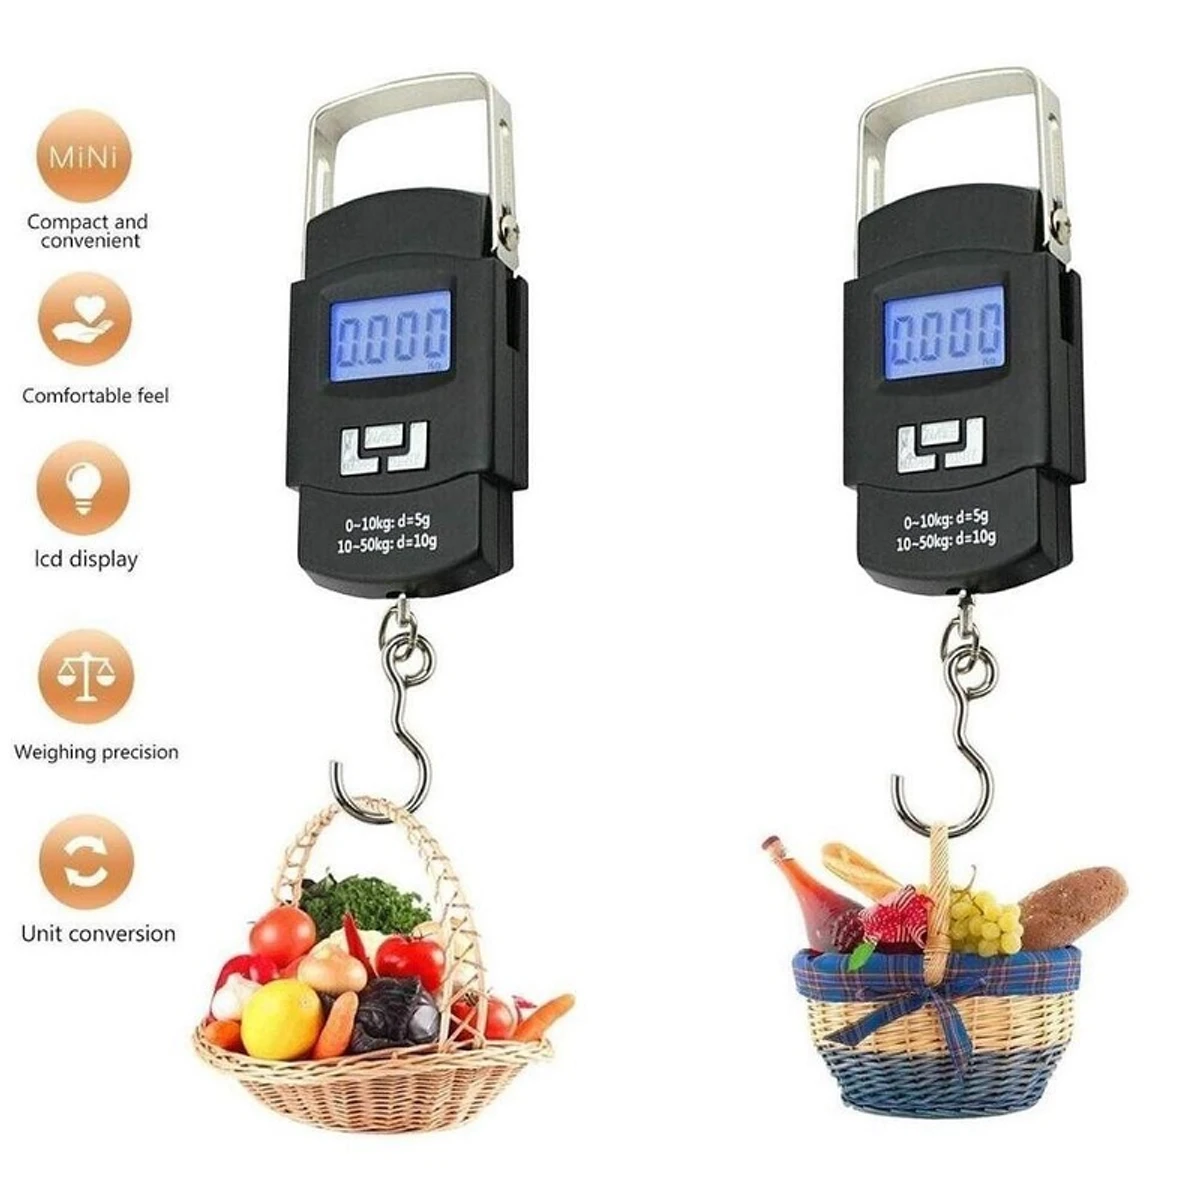 Portable Handy Mini Digital Electronic luggage Weight Scale (50kg) - Black